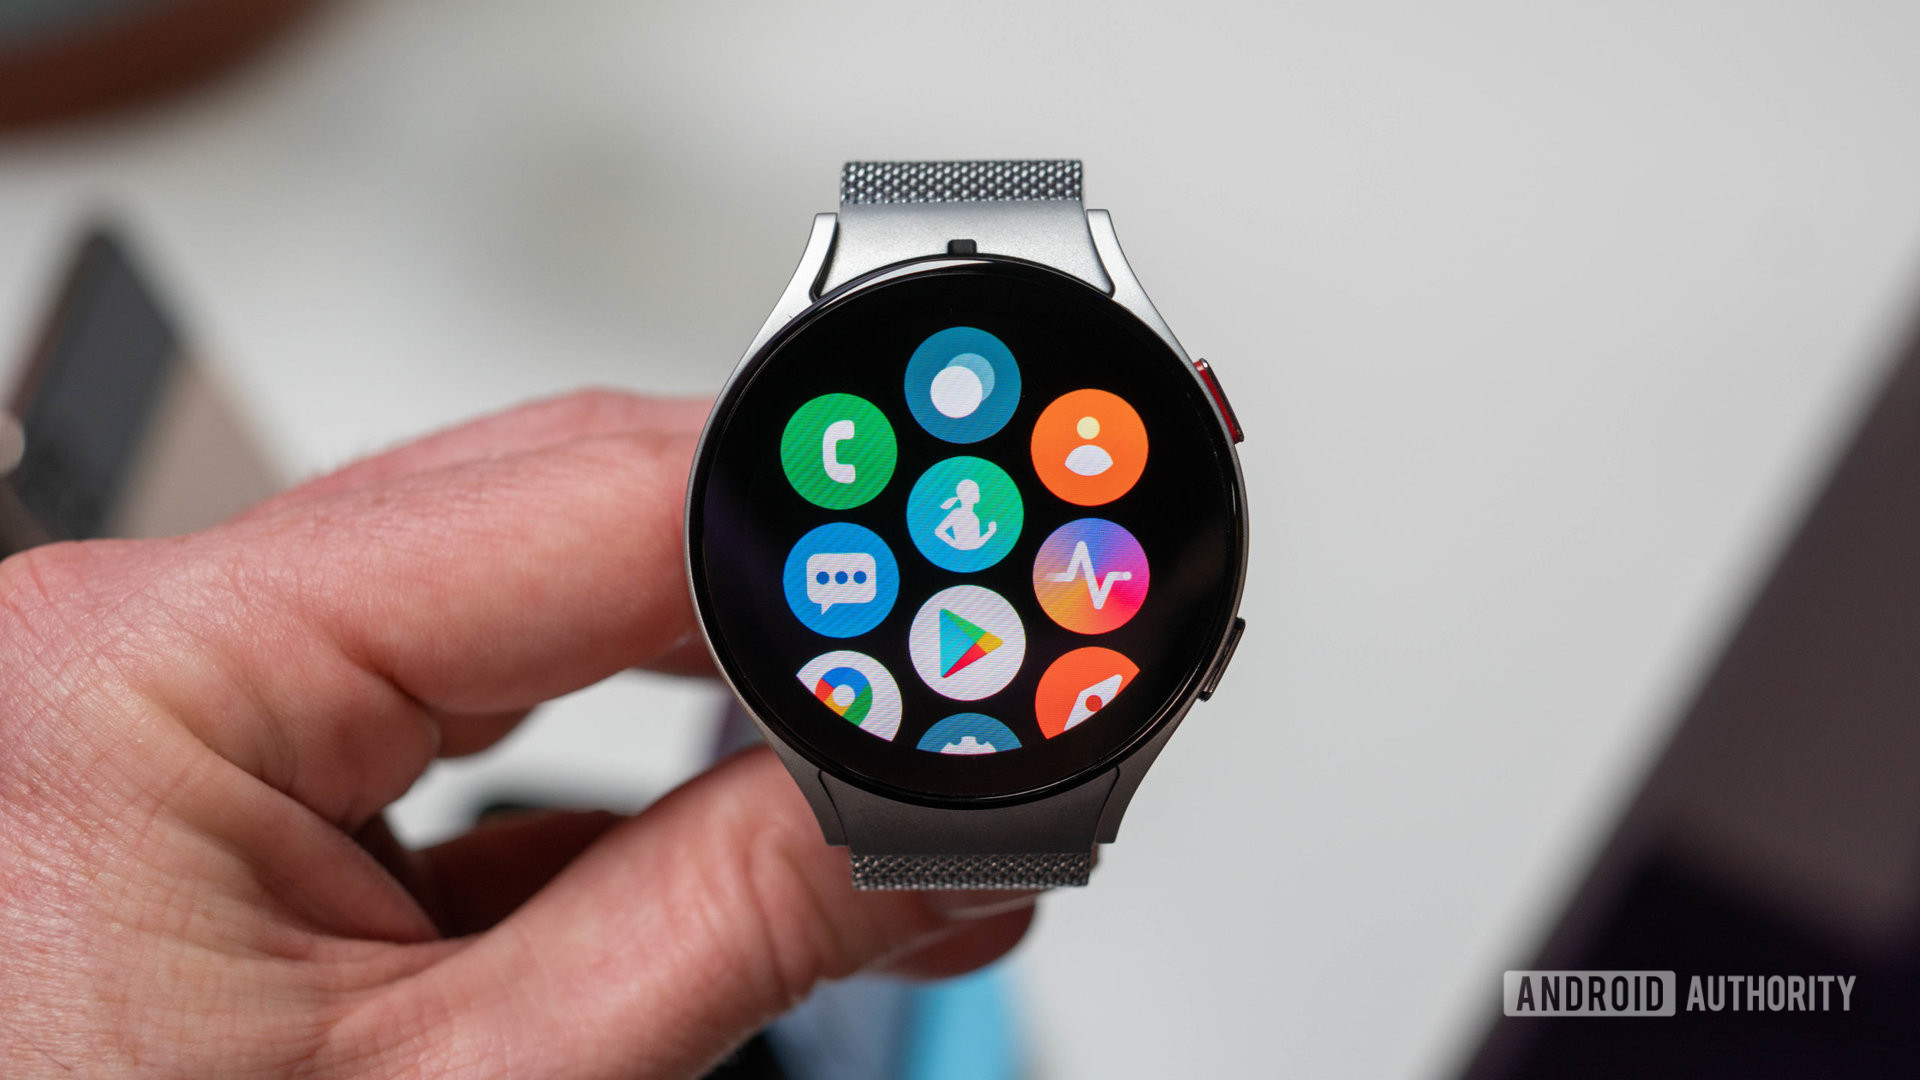 Samsung Galaxy Watch 5 in silver color with metal bracelet in hand showing app picker scaled